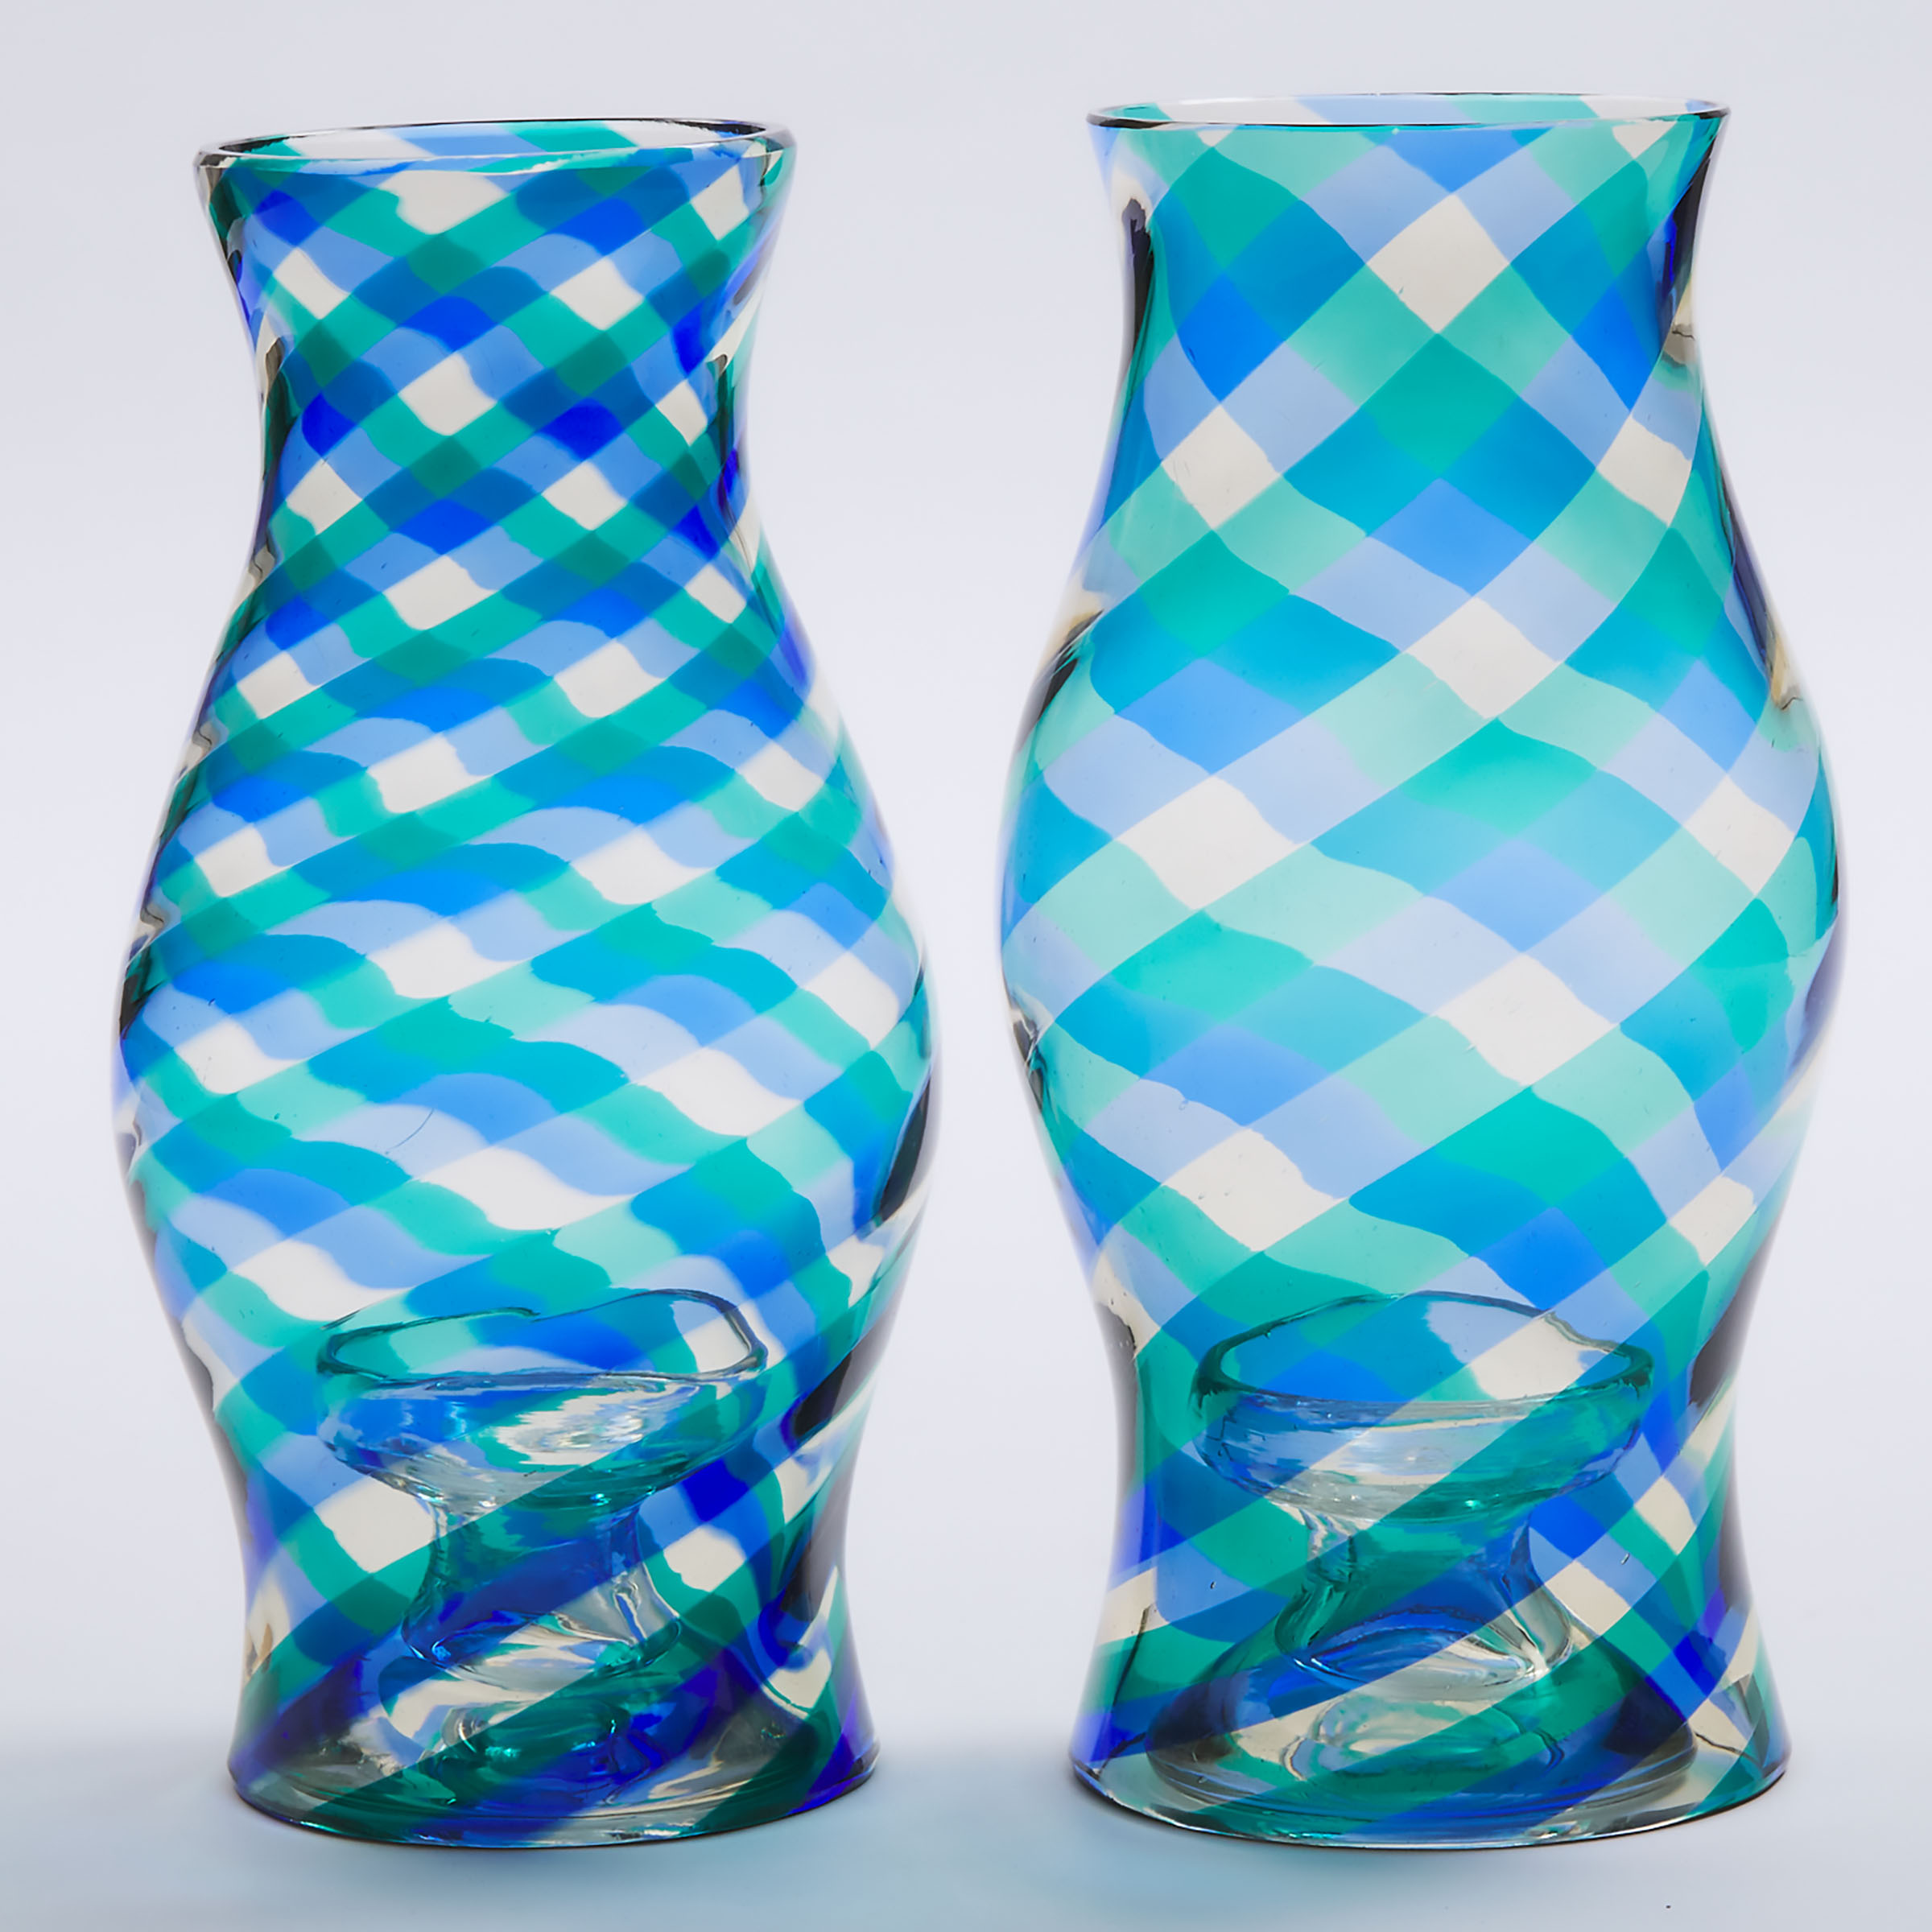 Pair of Venini Glass Low Candlesticks with Blue and Green Striped Hurricane Shades, mid-20th century